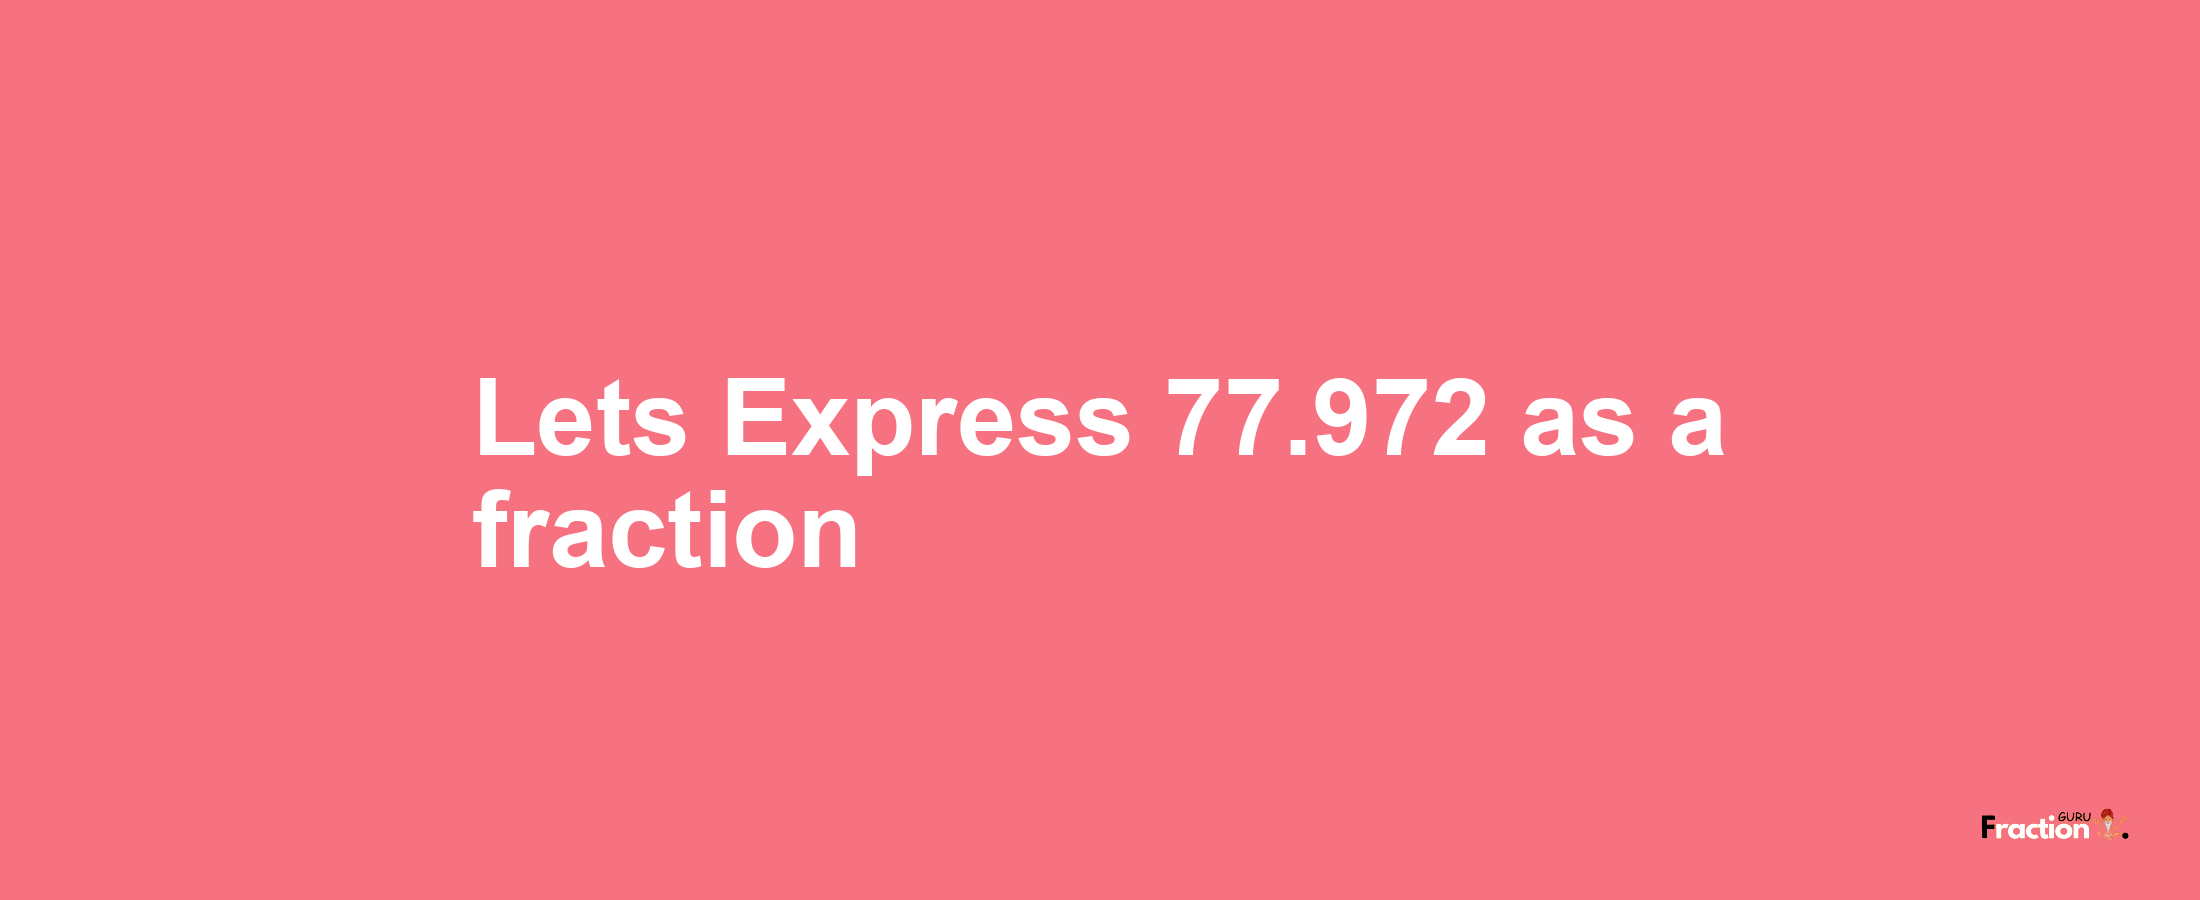 Lets Express 77.972 as afraction